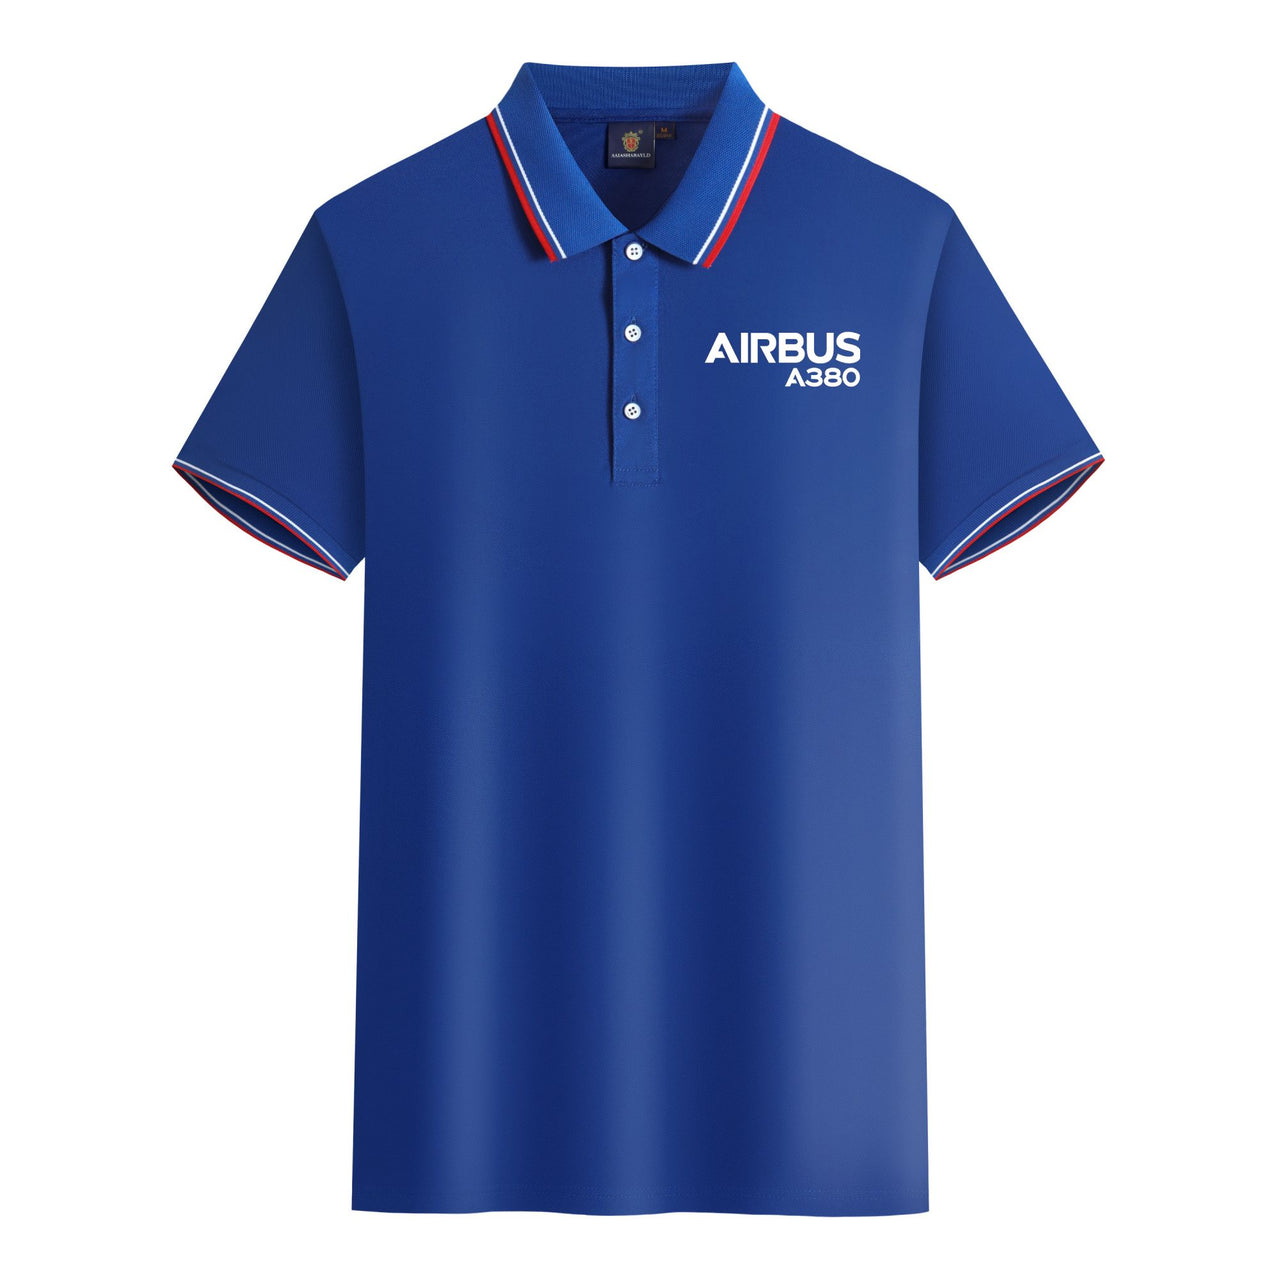 Airbus A380 & Text Designed Stylish Polo T-Shirts